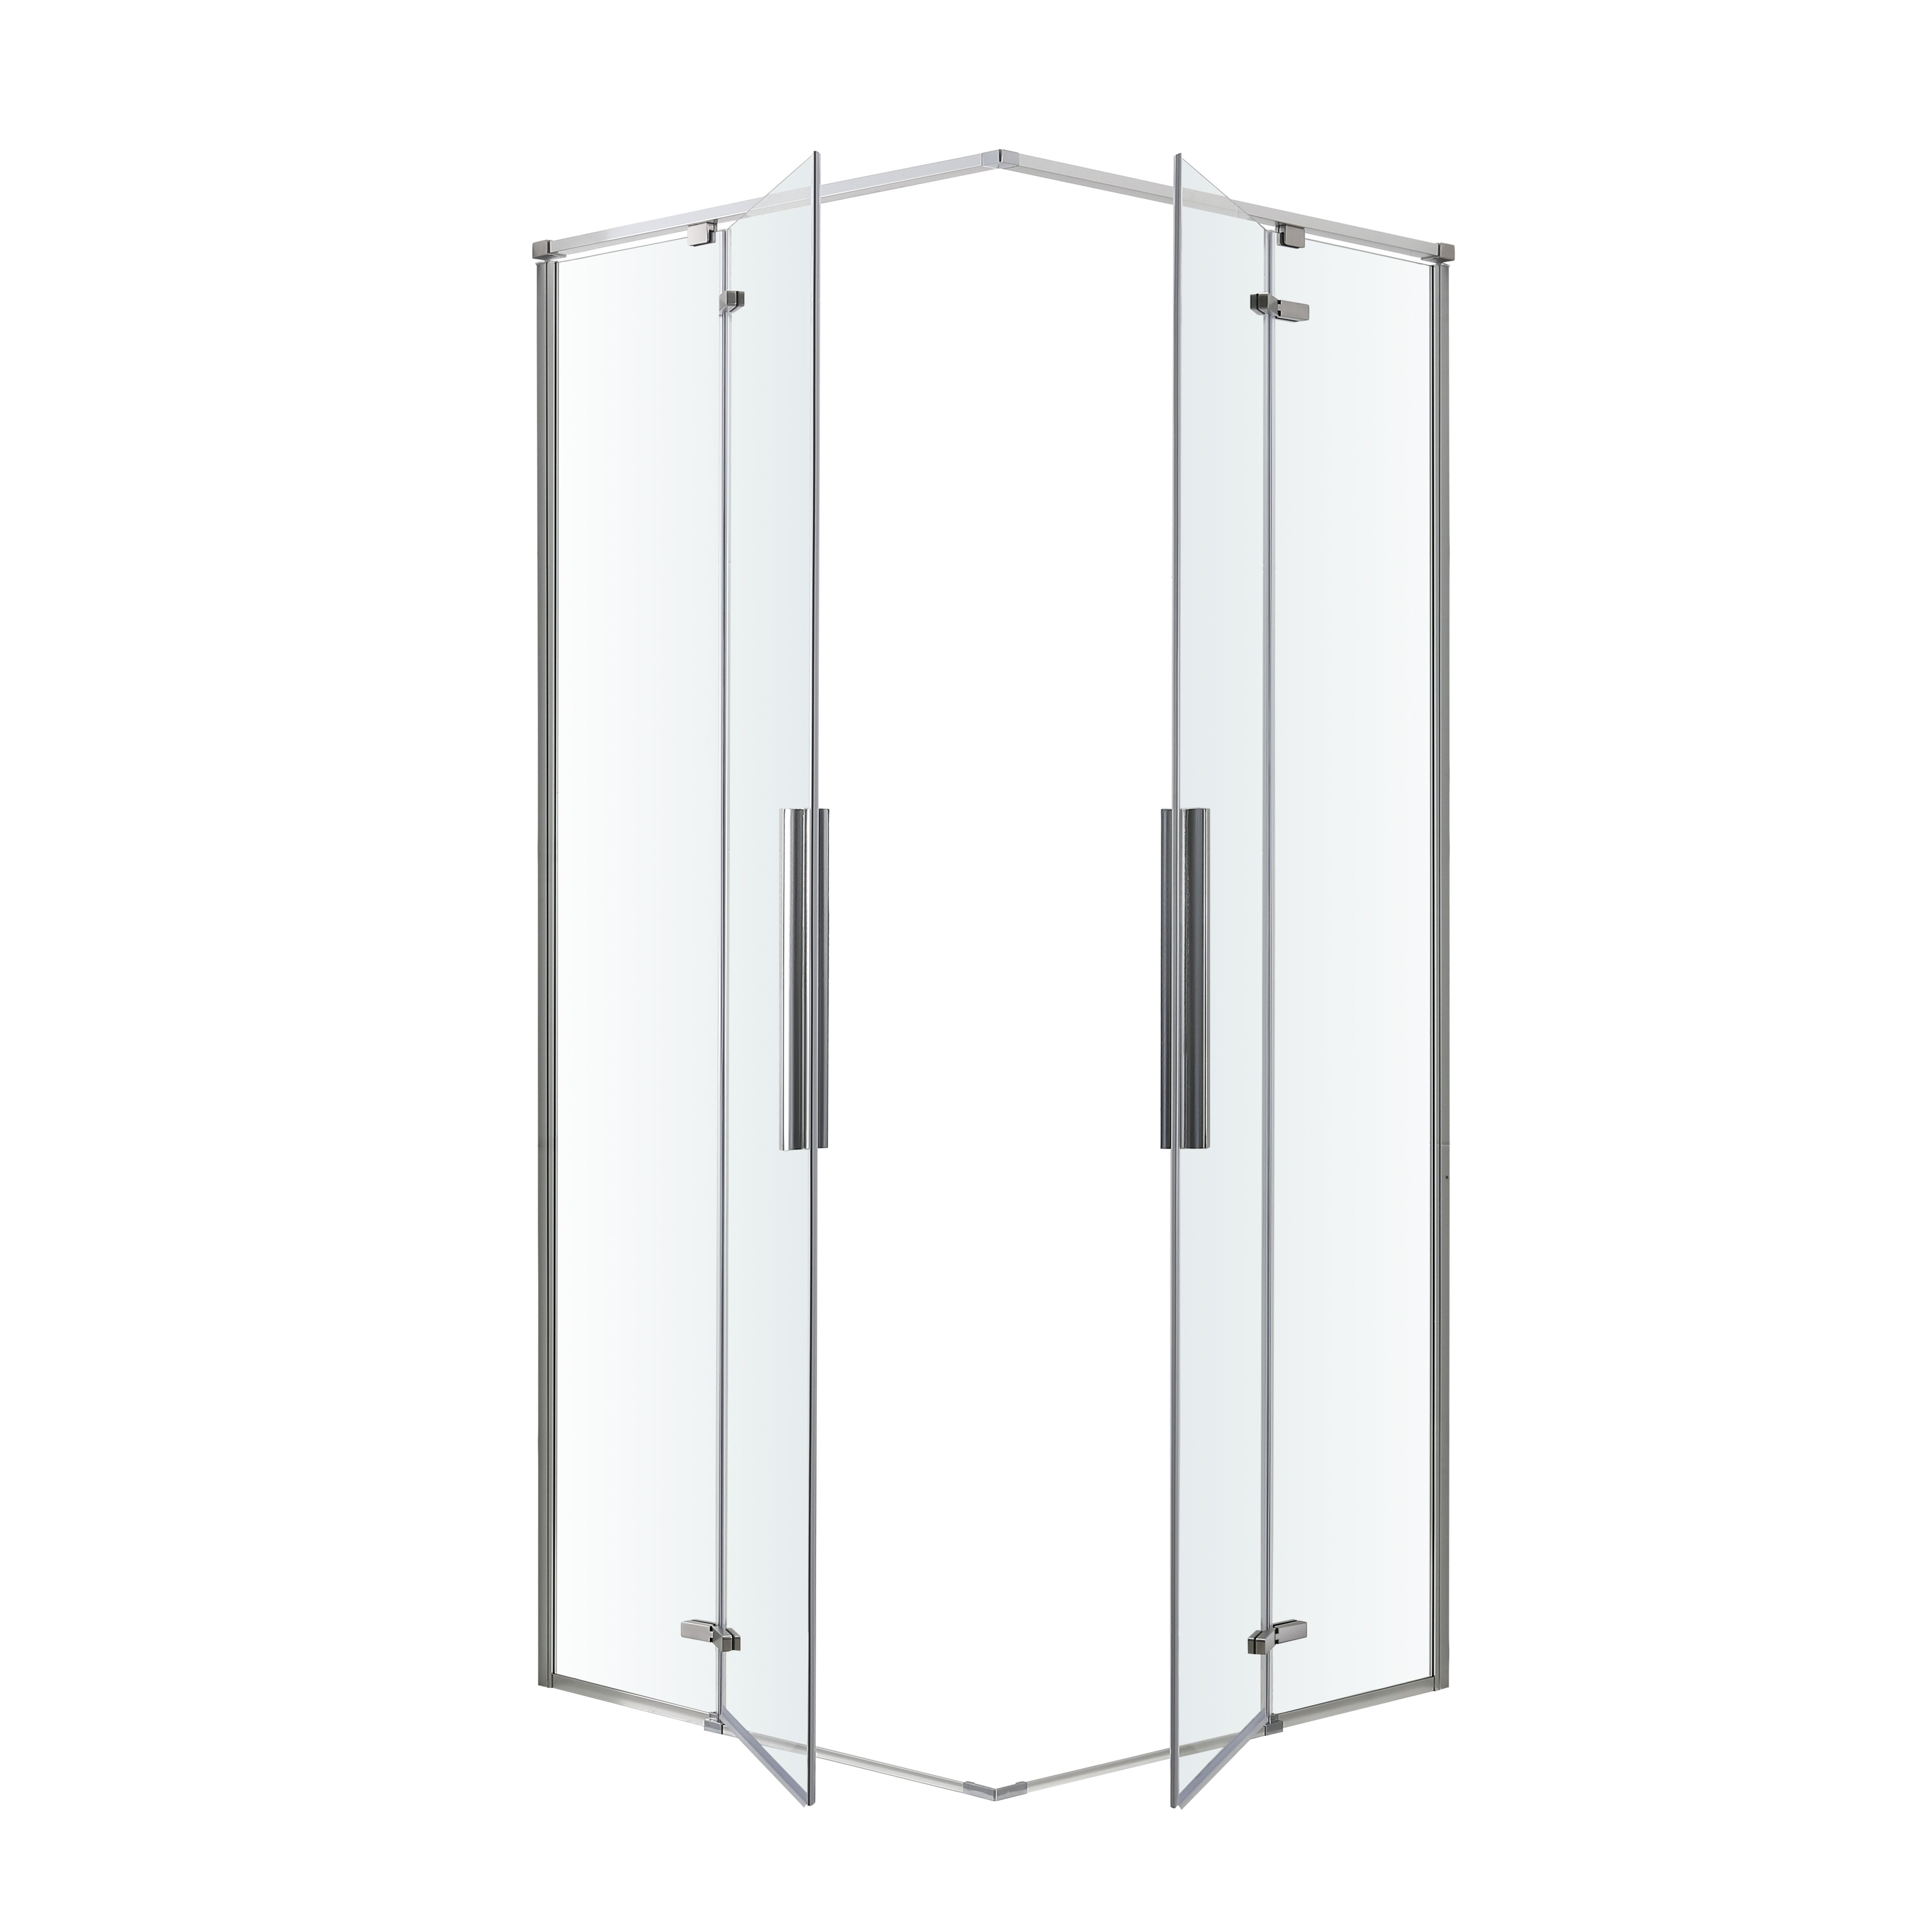 GoodHome Ezili Clear Silver effect Universal Corner Shower enclosure with Hinged door (W)79cm (D)79cm